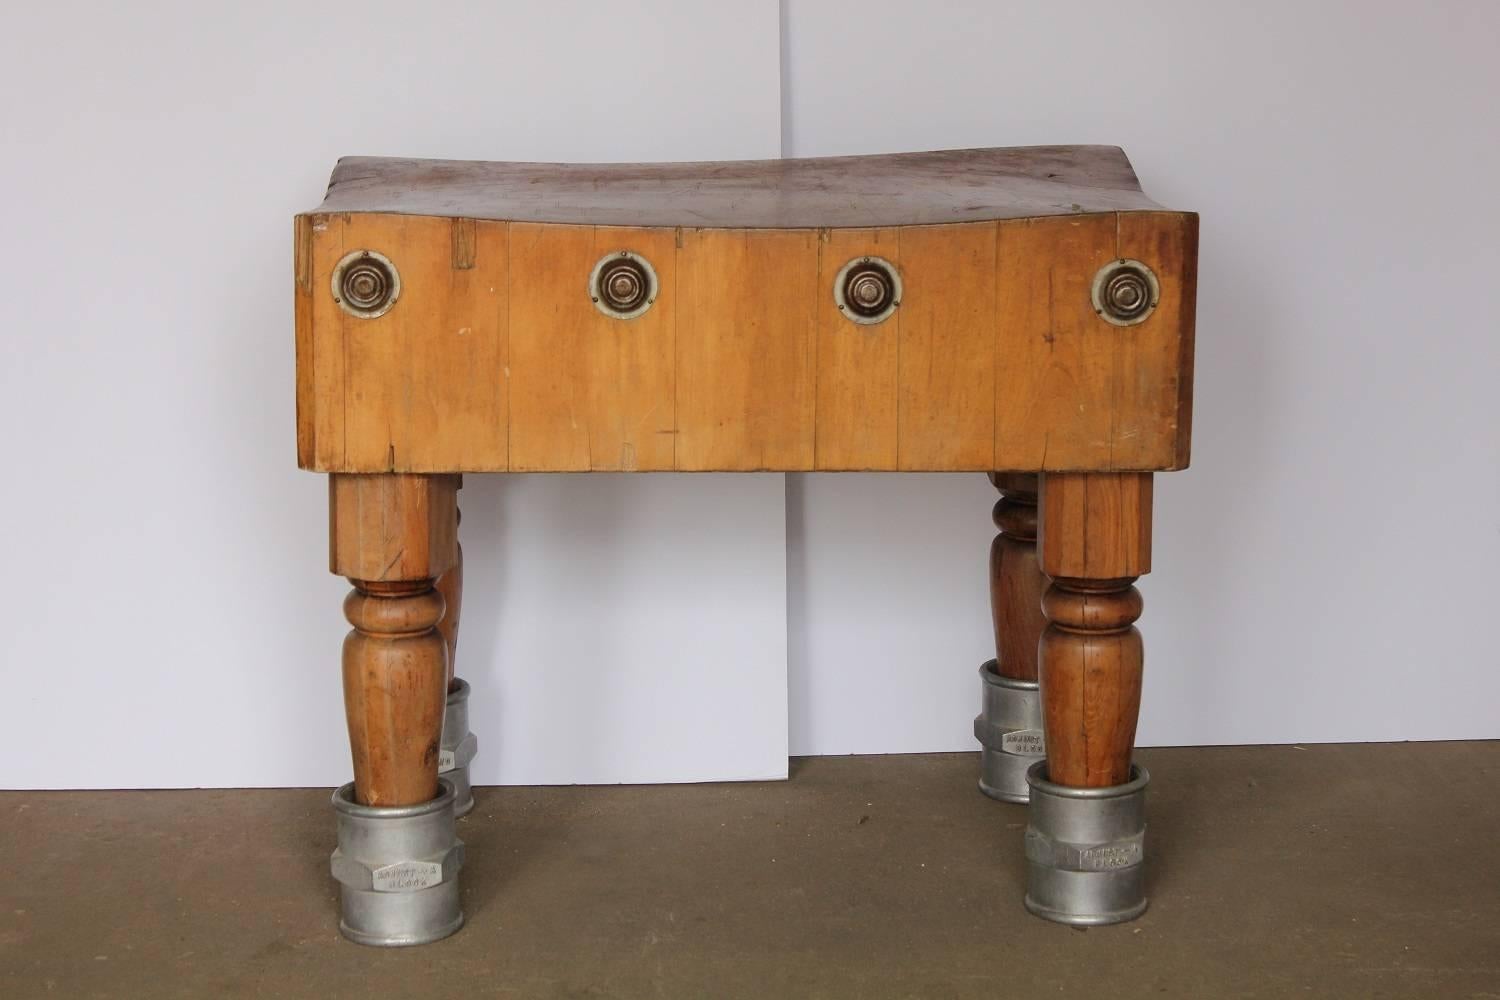 Unusual antique American butcher block table with adjustable height.